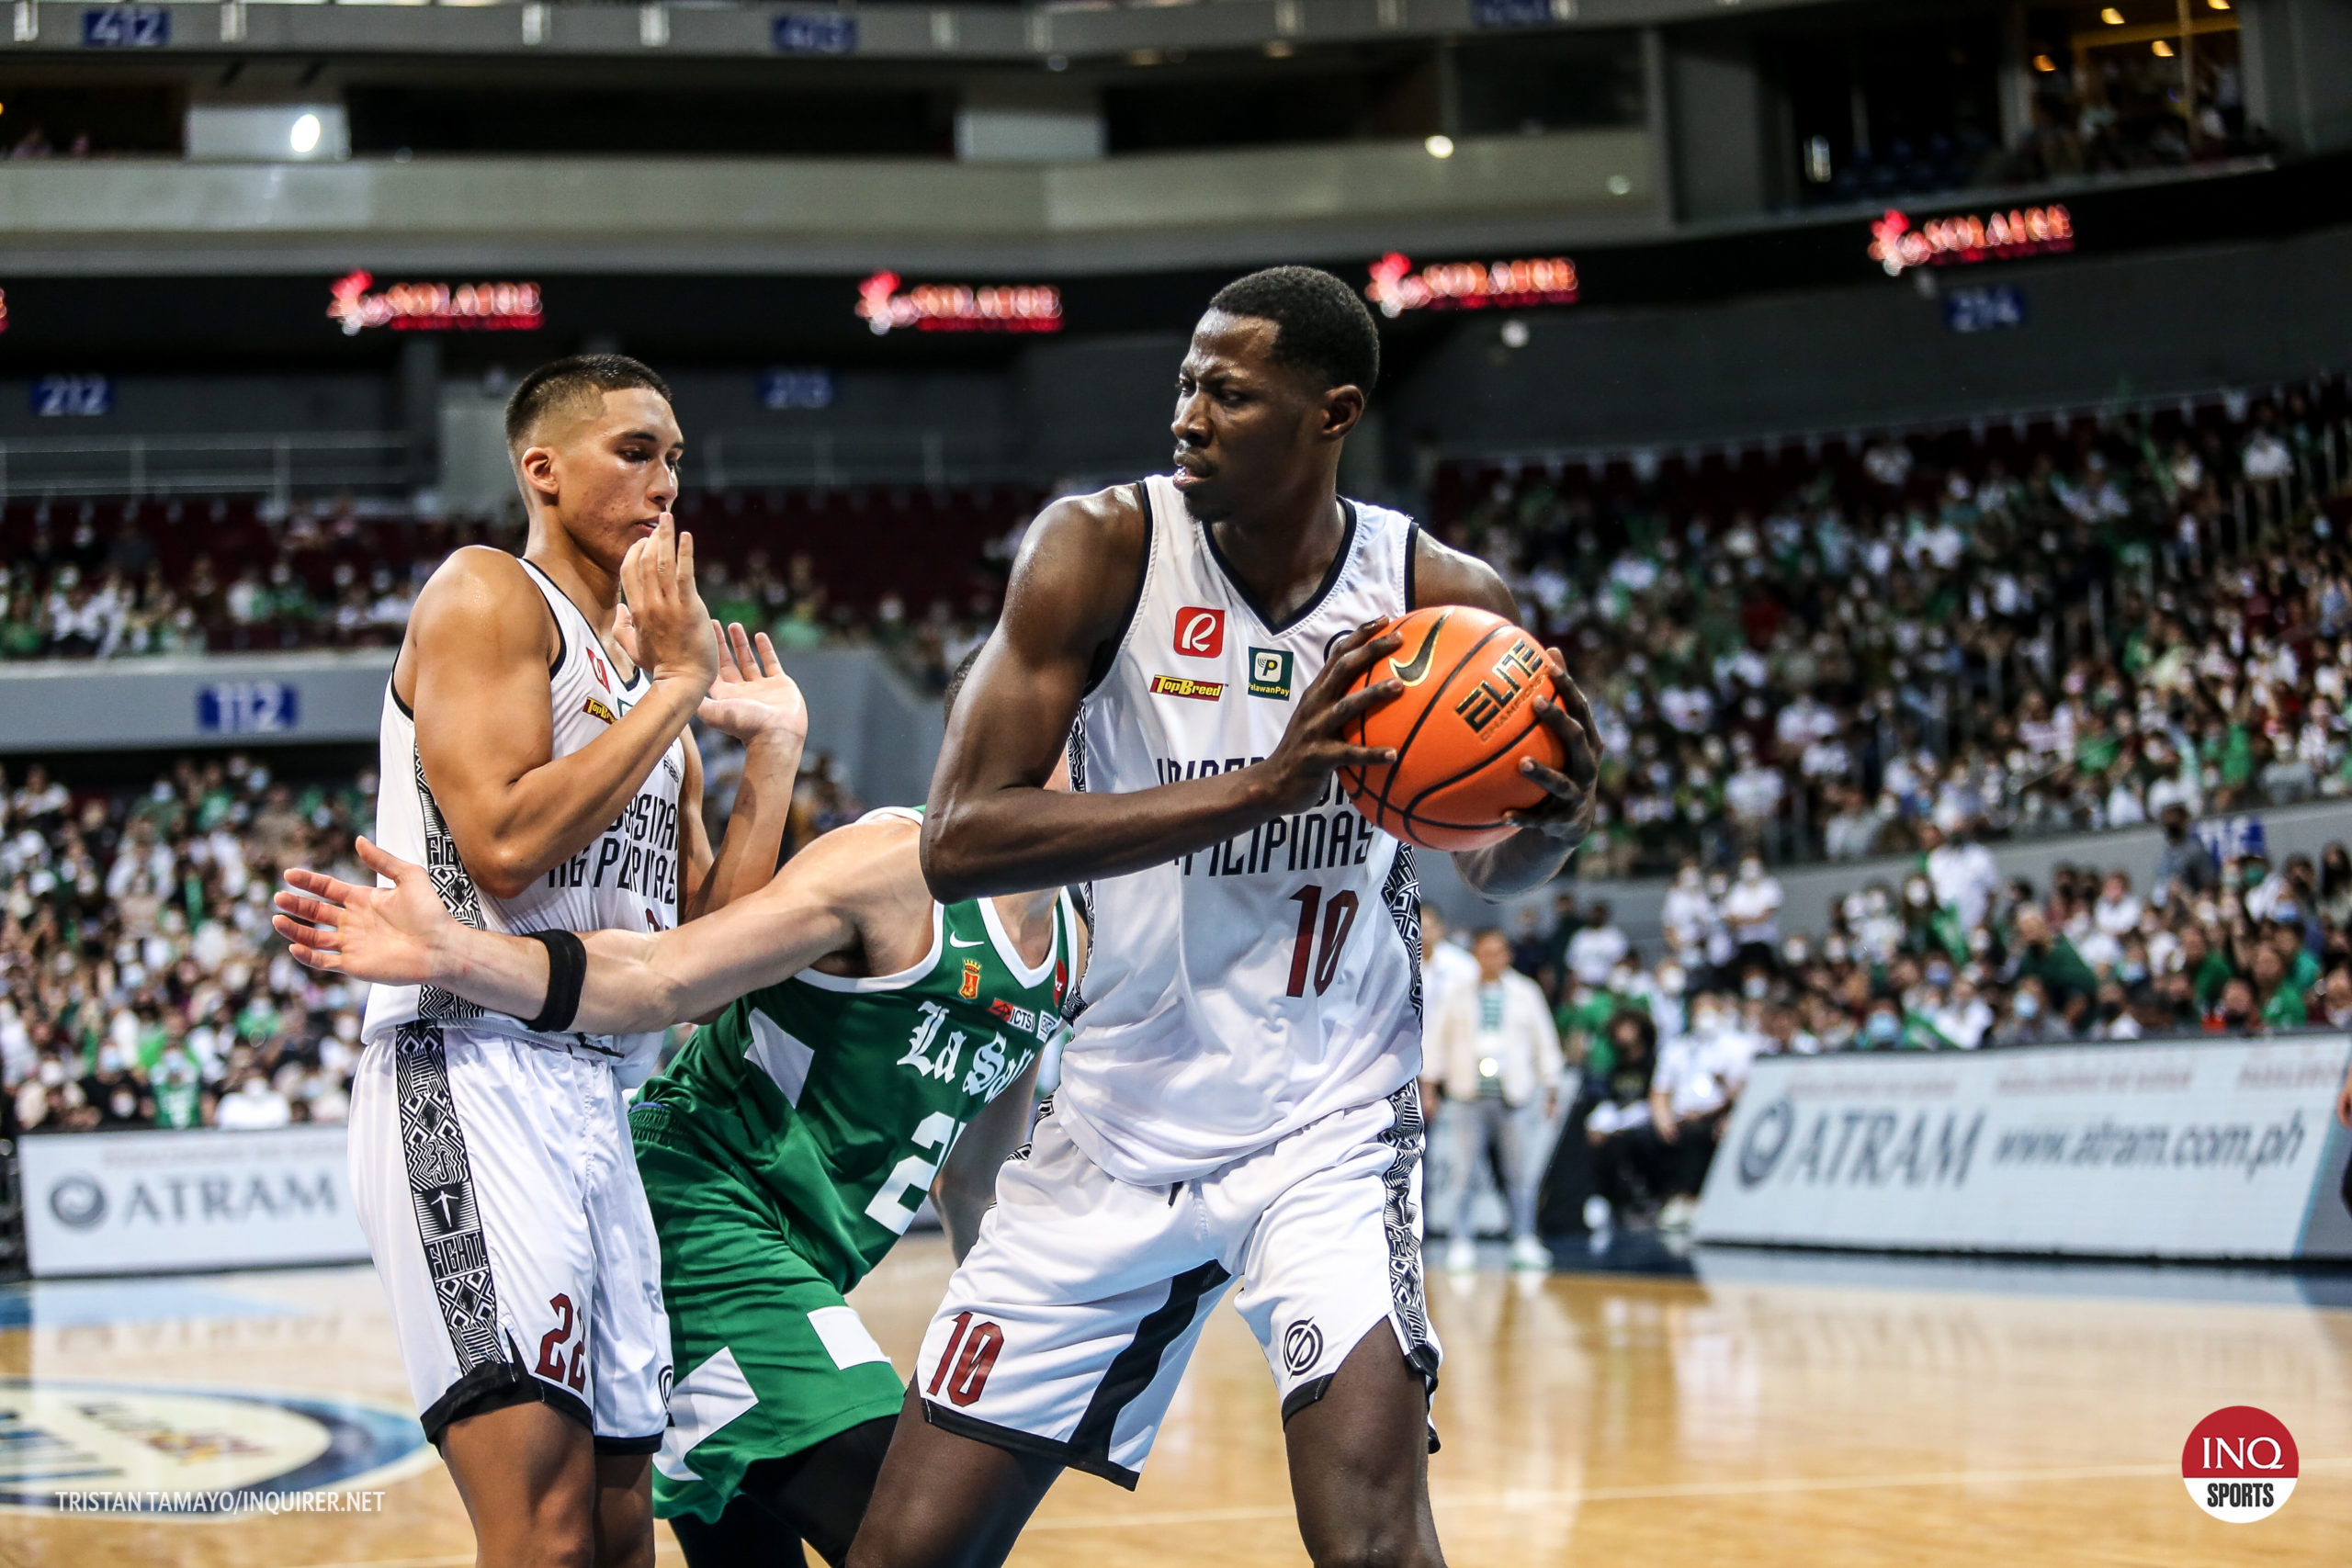 UP Fighting Maroons' Malick Diouf. Photo by Tristan Tamayo/INQUIRER.net